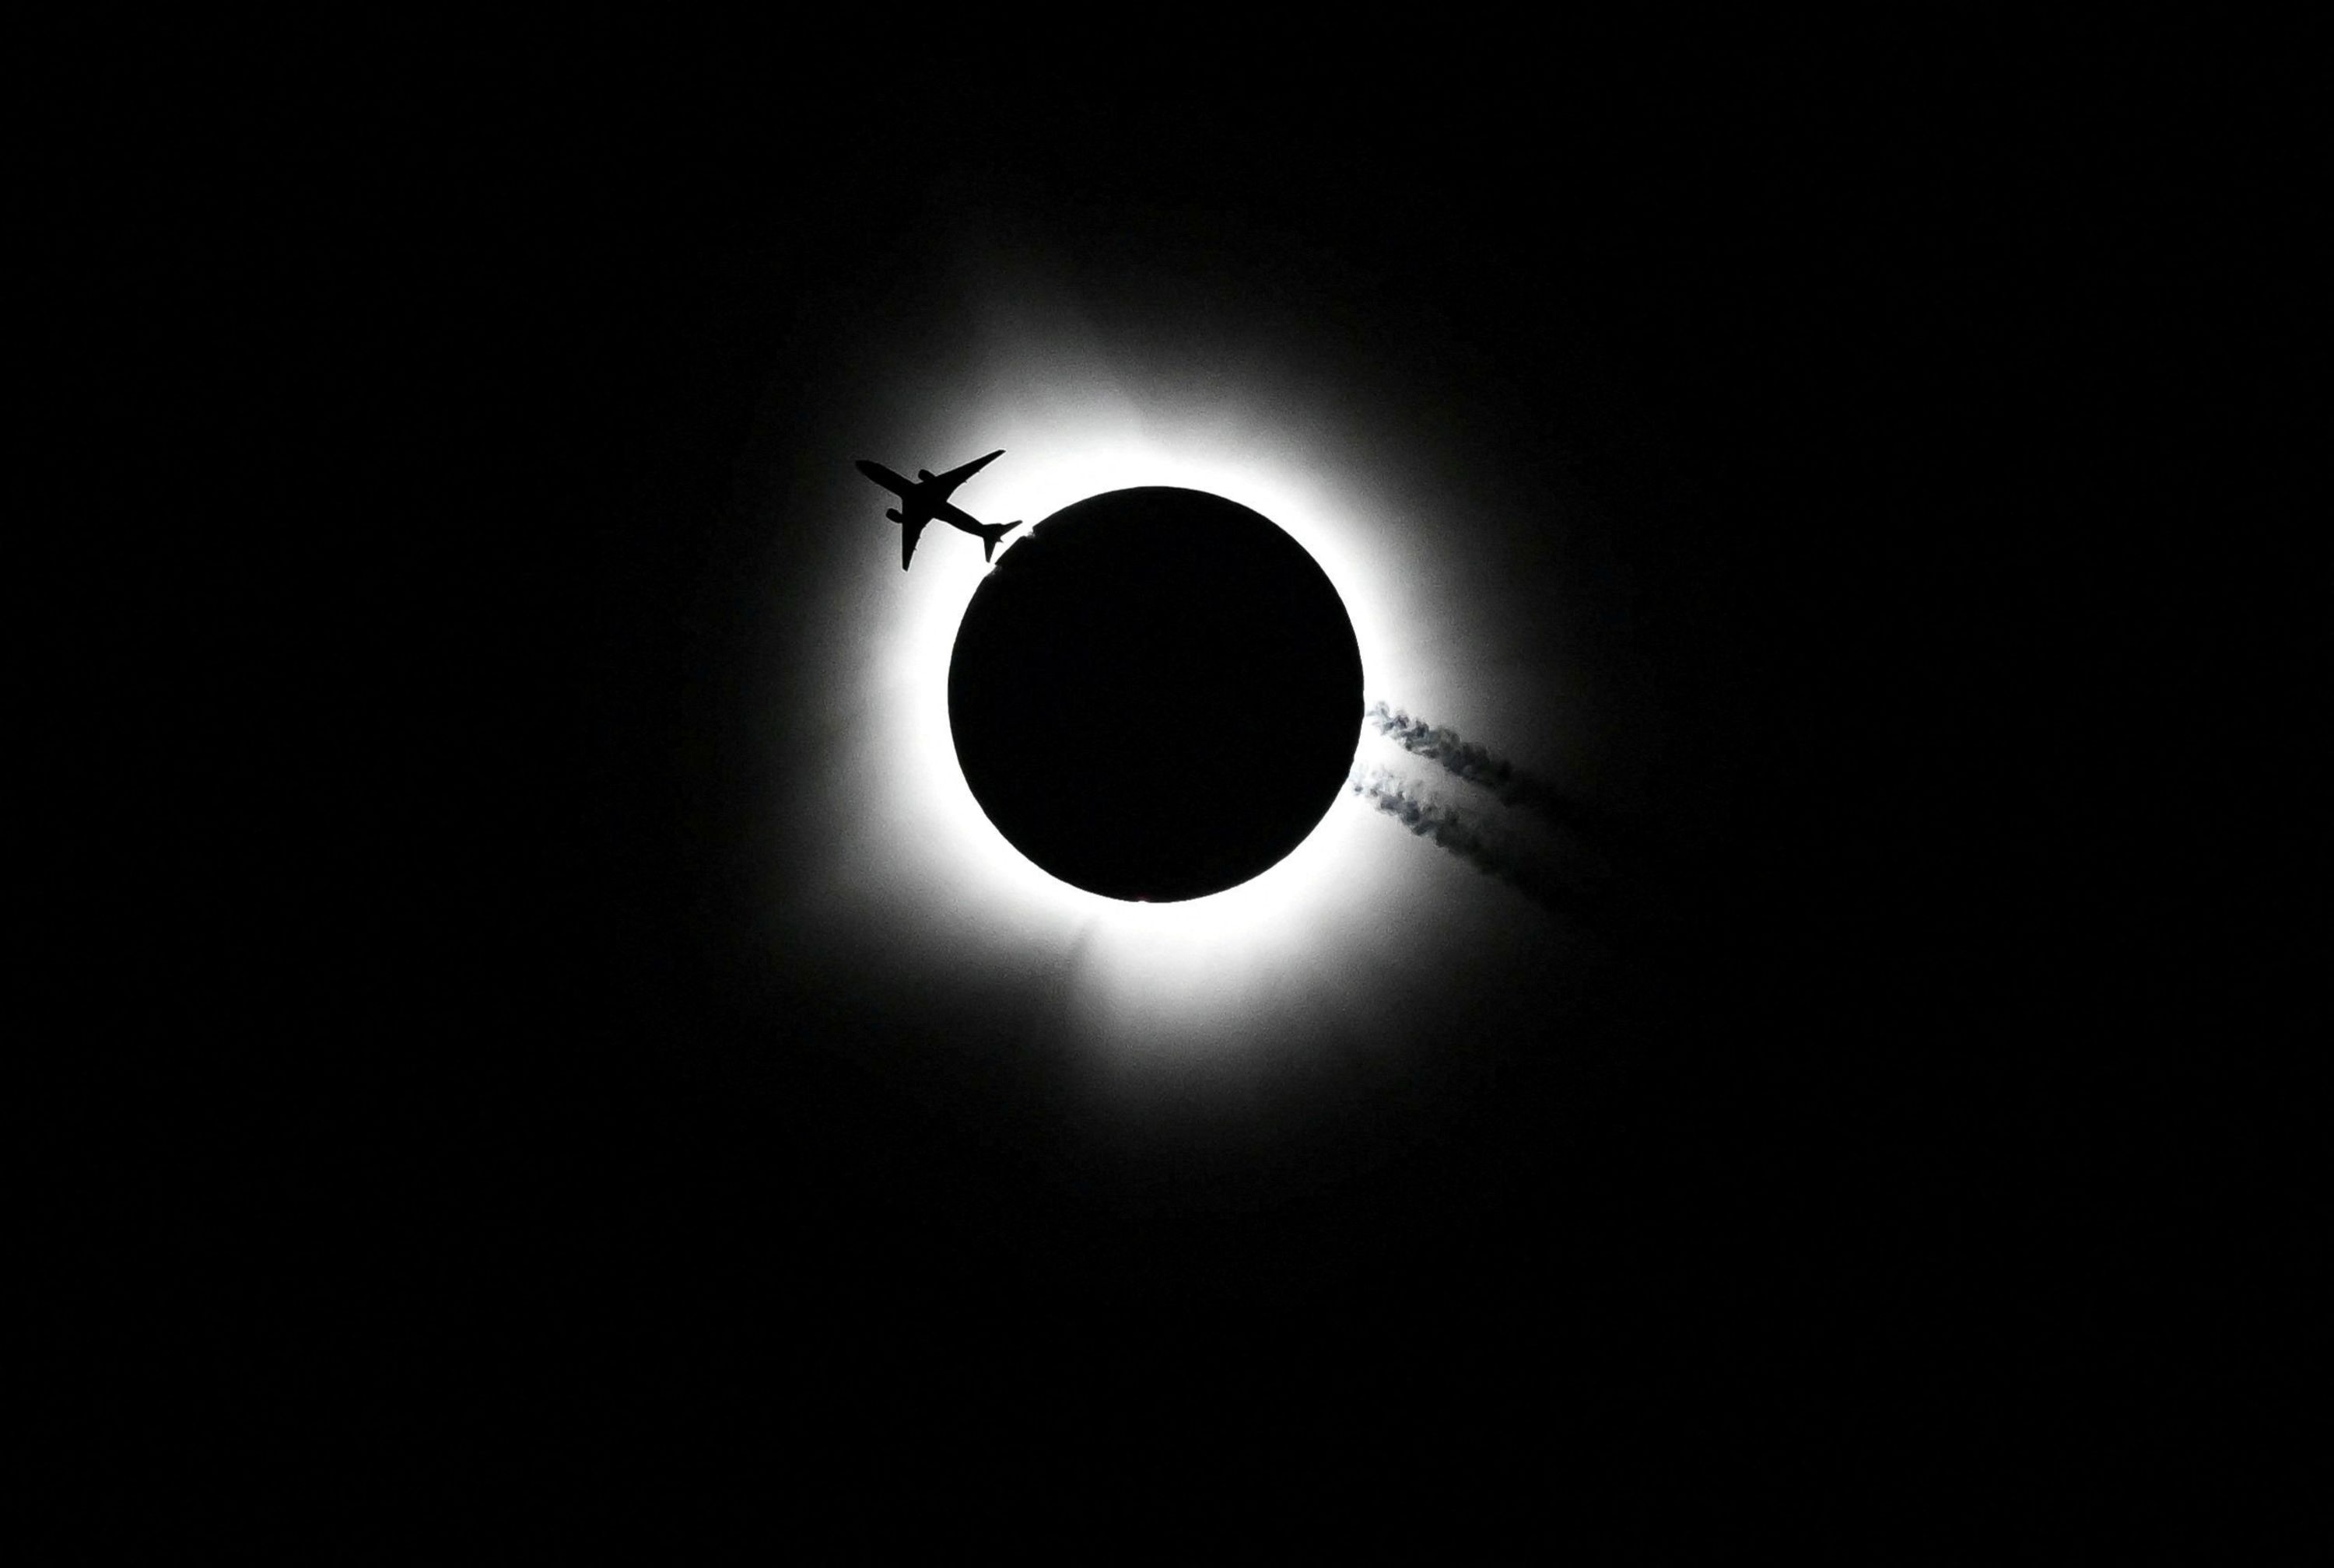 An airplane passes by as the <a href="index.php?page=&url=https%3A%2F%2Fwww.cnn.com%2F2024%2F04%2F08%2Fworld%2Fgallery%2Fsolar-eclipse-photos%2Findex.html" target="_blank">total solar eclipse</a> is seen from Bloomington, Indiana, on Monday, April 8.